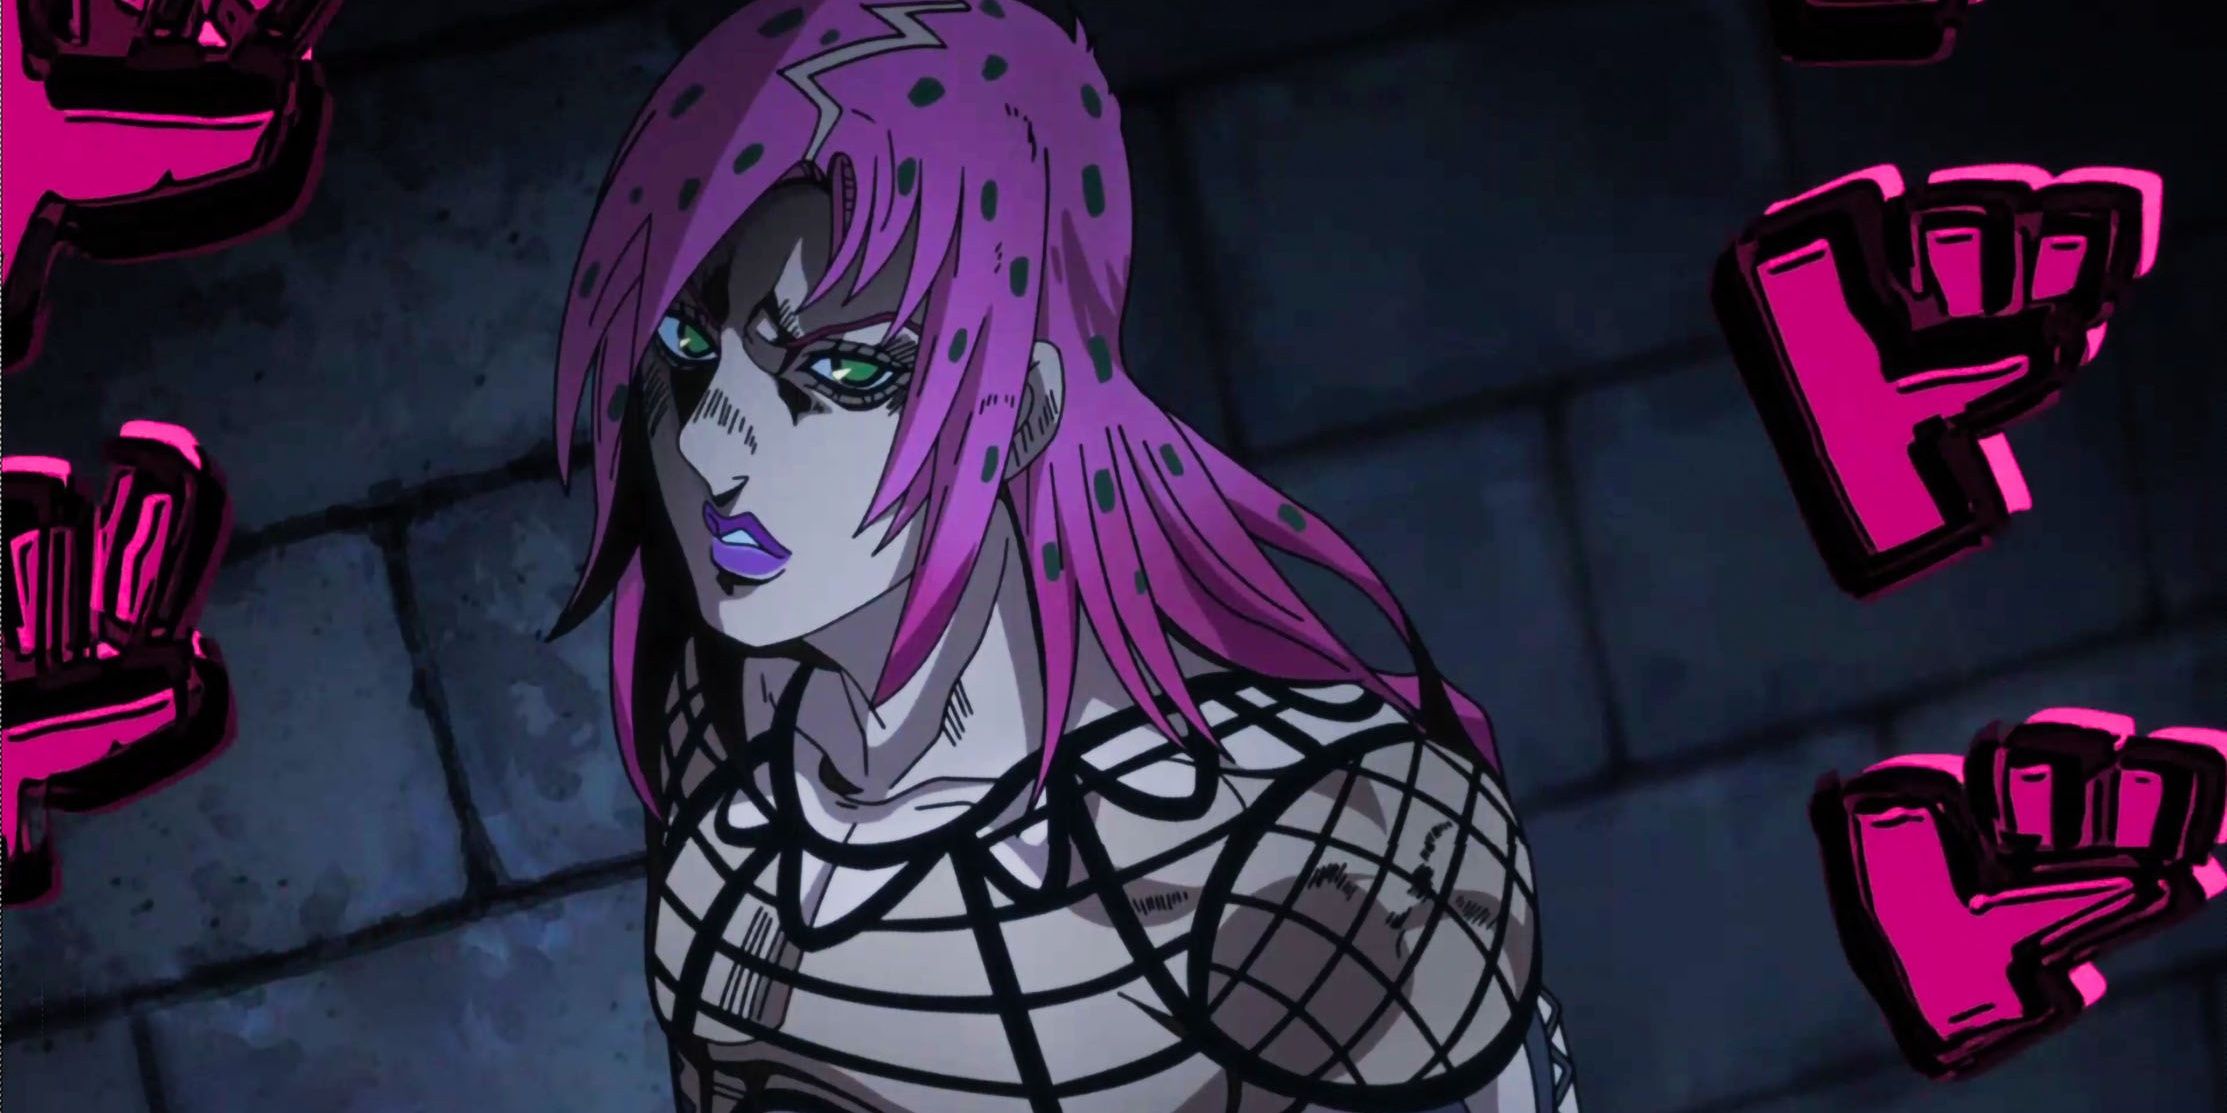 Diavolo with pink hair and a fishnet shirt in JoJo's Bizarre Adventure.